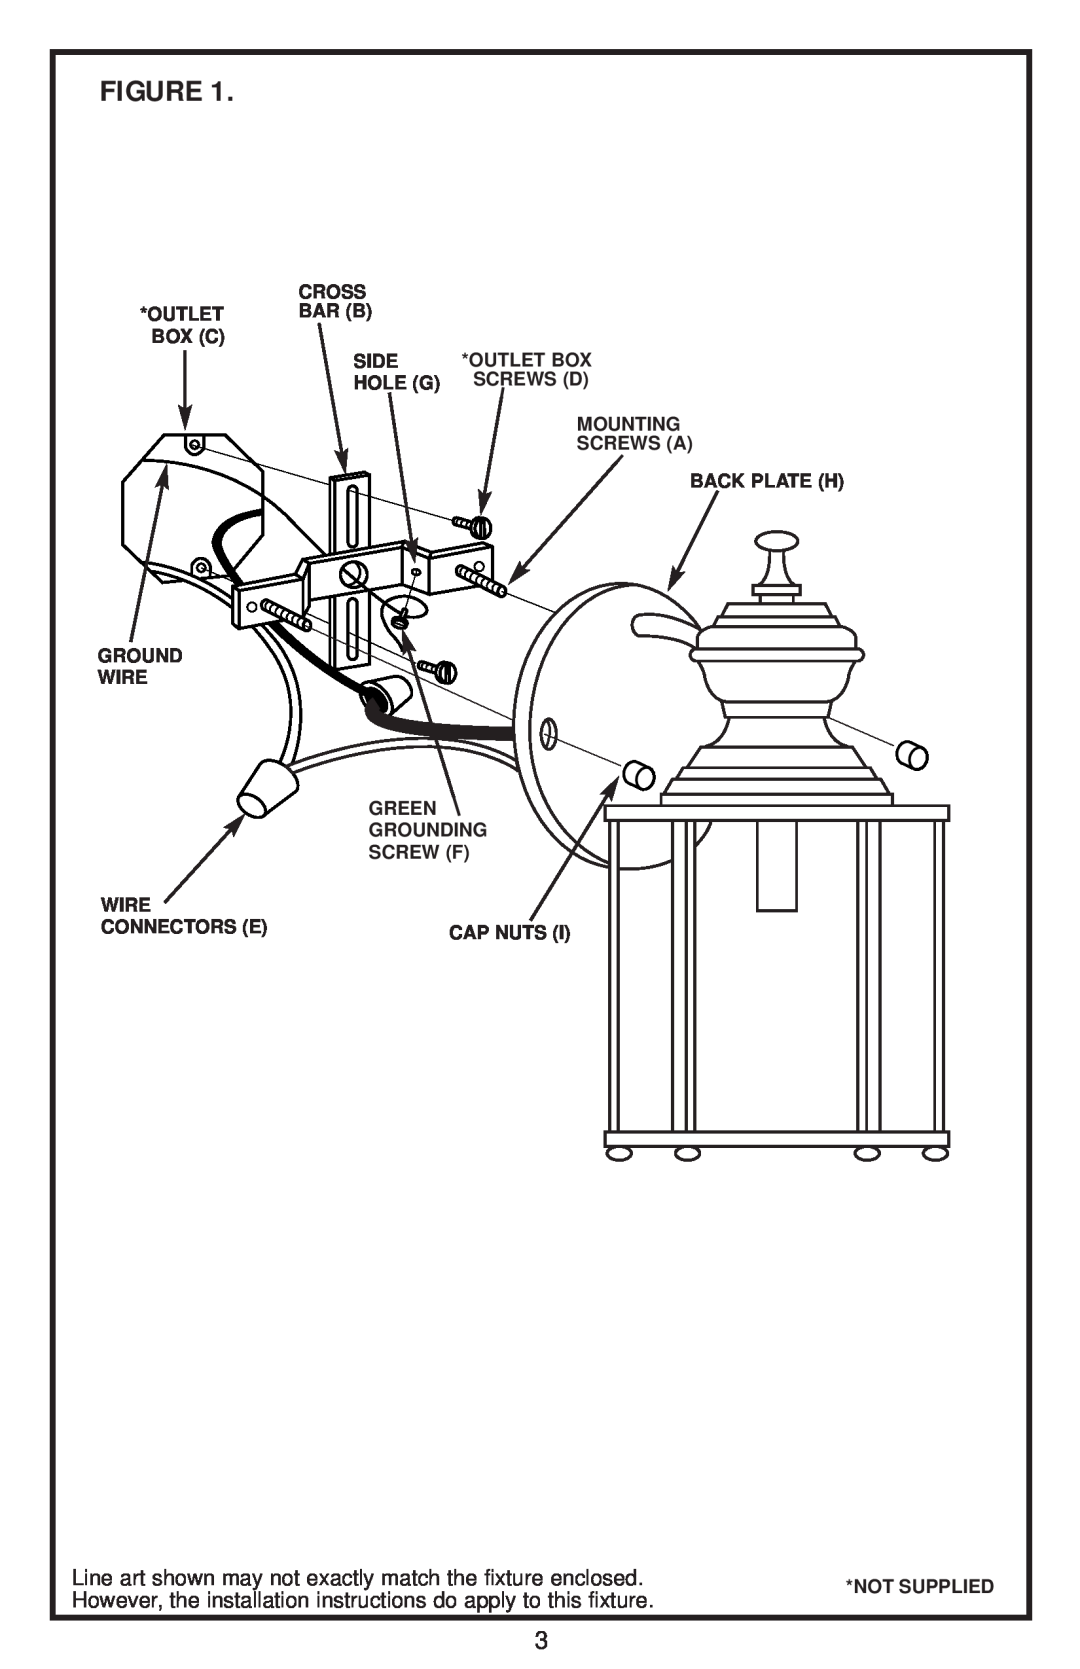 Westinghouse 11704 owner manual Line art shown may not exactly match the fixture enclosed 